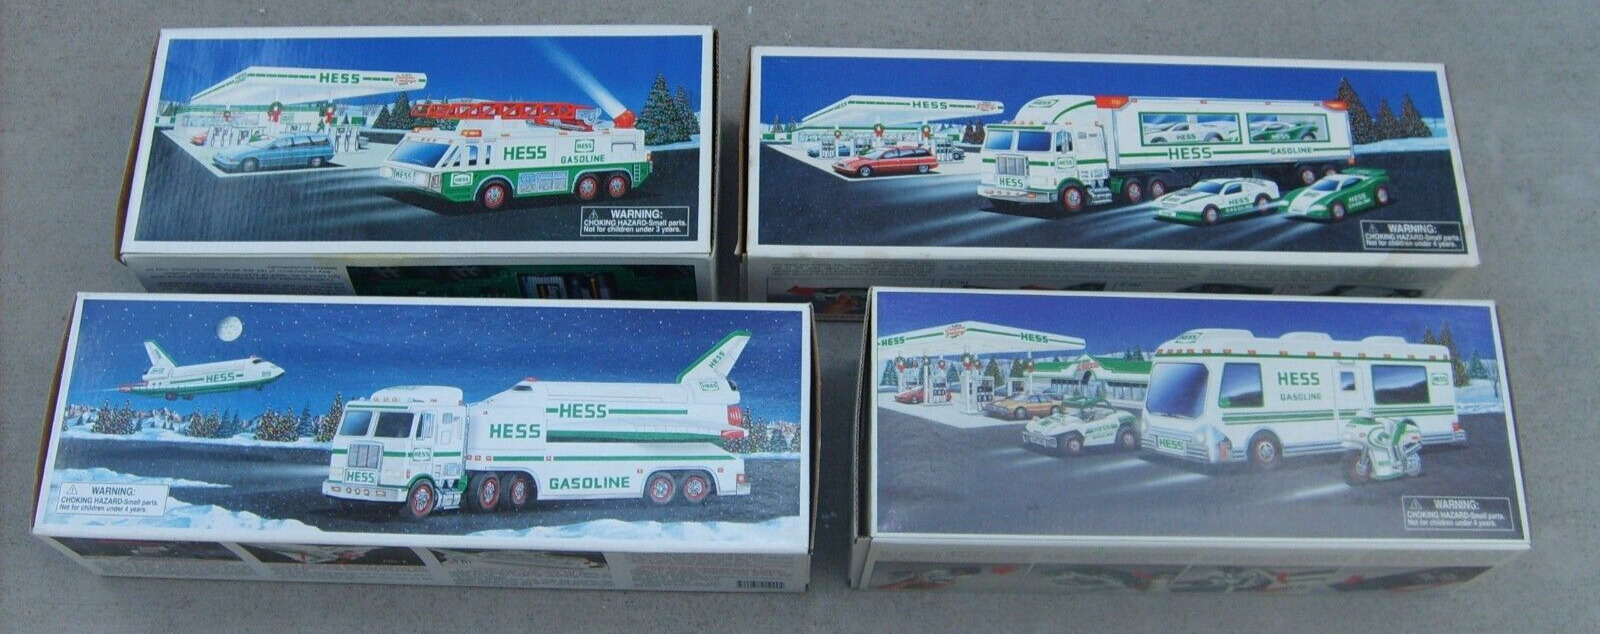 4 HESS TRUCK LOT 1996 1997 1998 1999 BRAND NEW BOXED